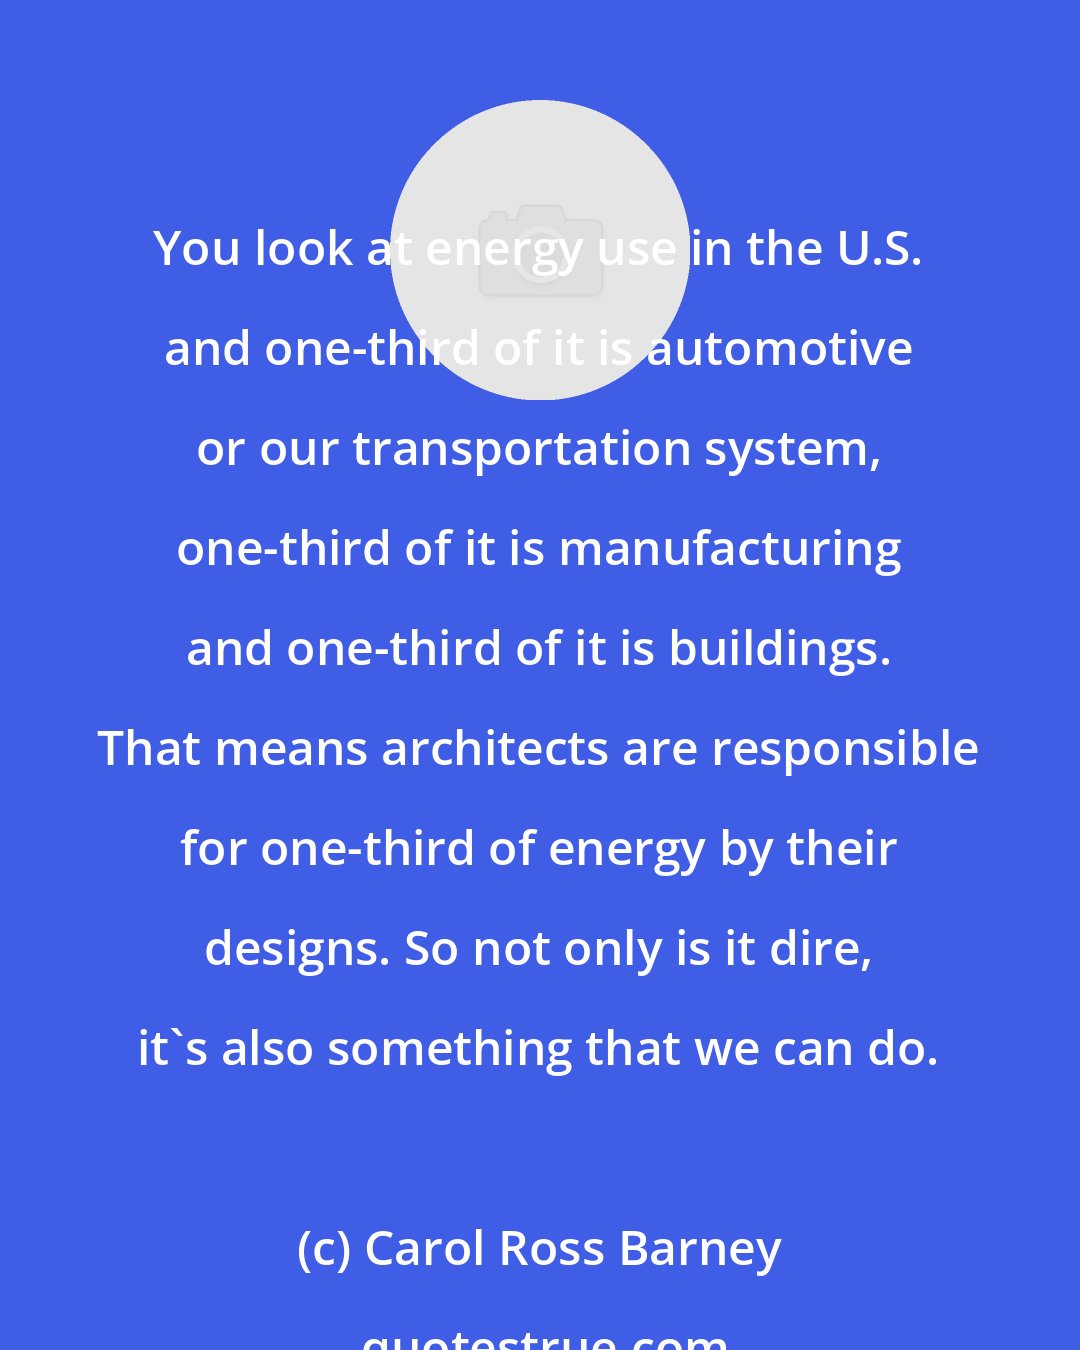 Carol Ross Barney: You look at energy use in the U.S. and one-third of it is automotive or our transportation system, one-third of it is manufacturing and one-third of it is buildings. That means architects are responsible for one-third of energy by their designs. So not only is it dire, it's also something that we can do.